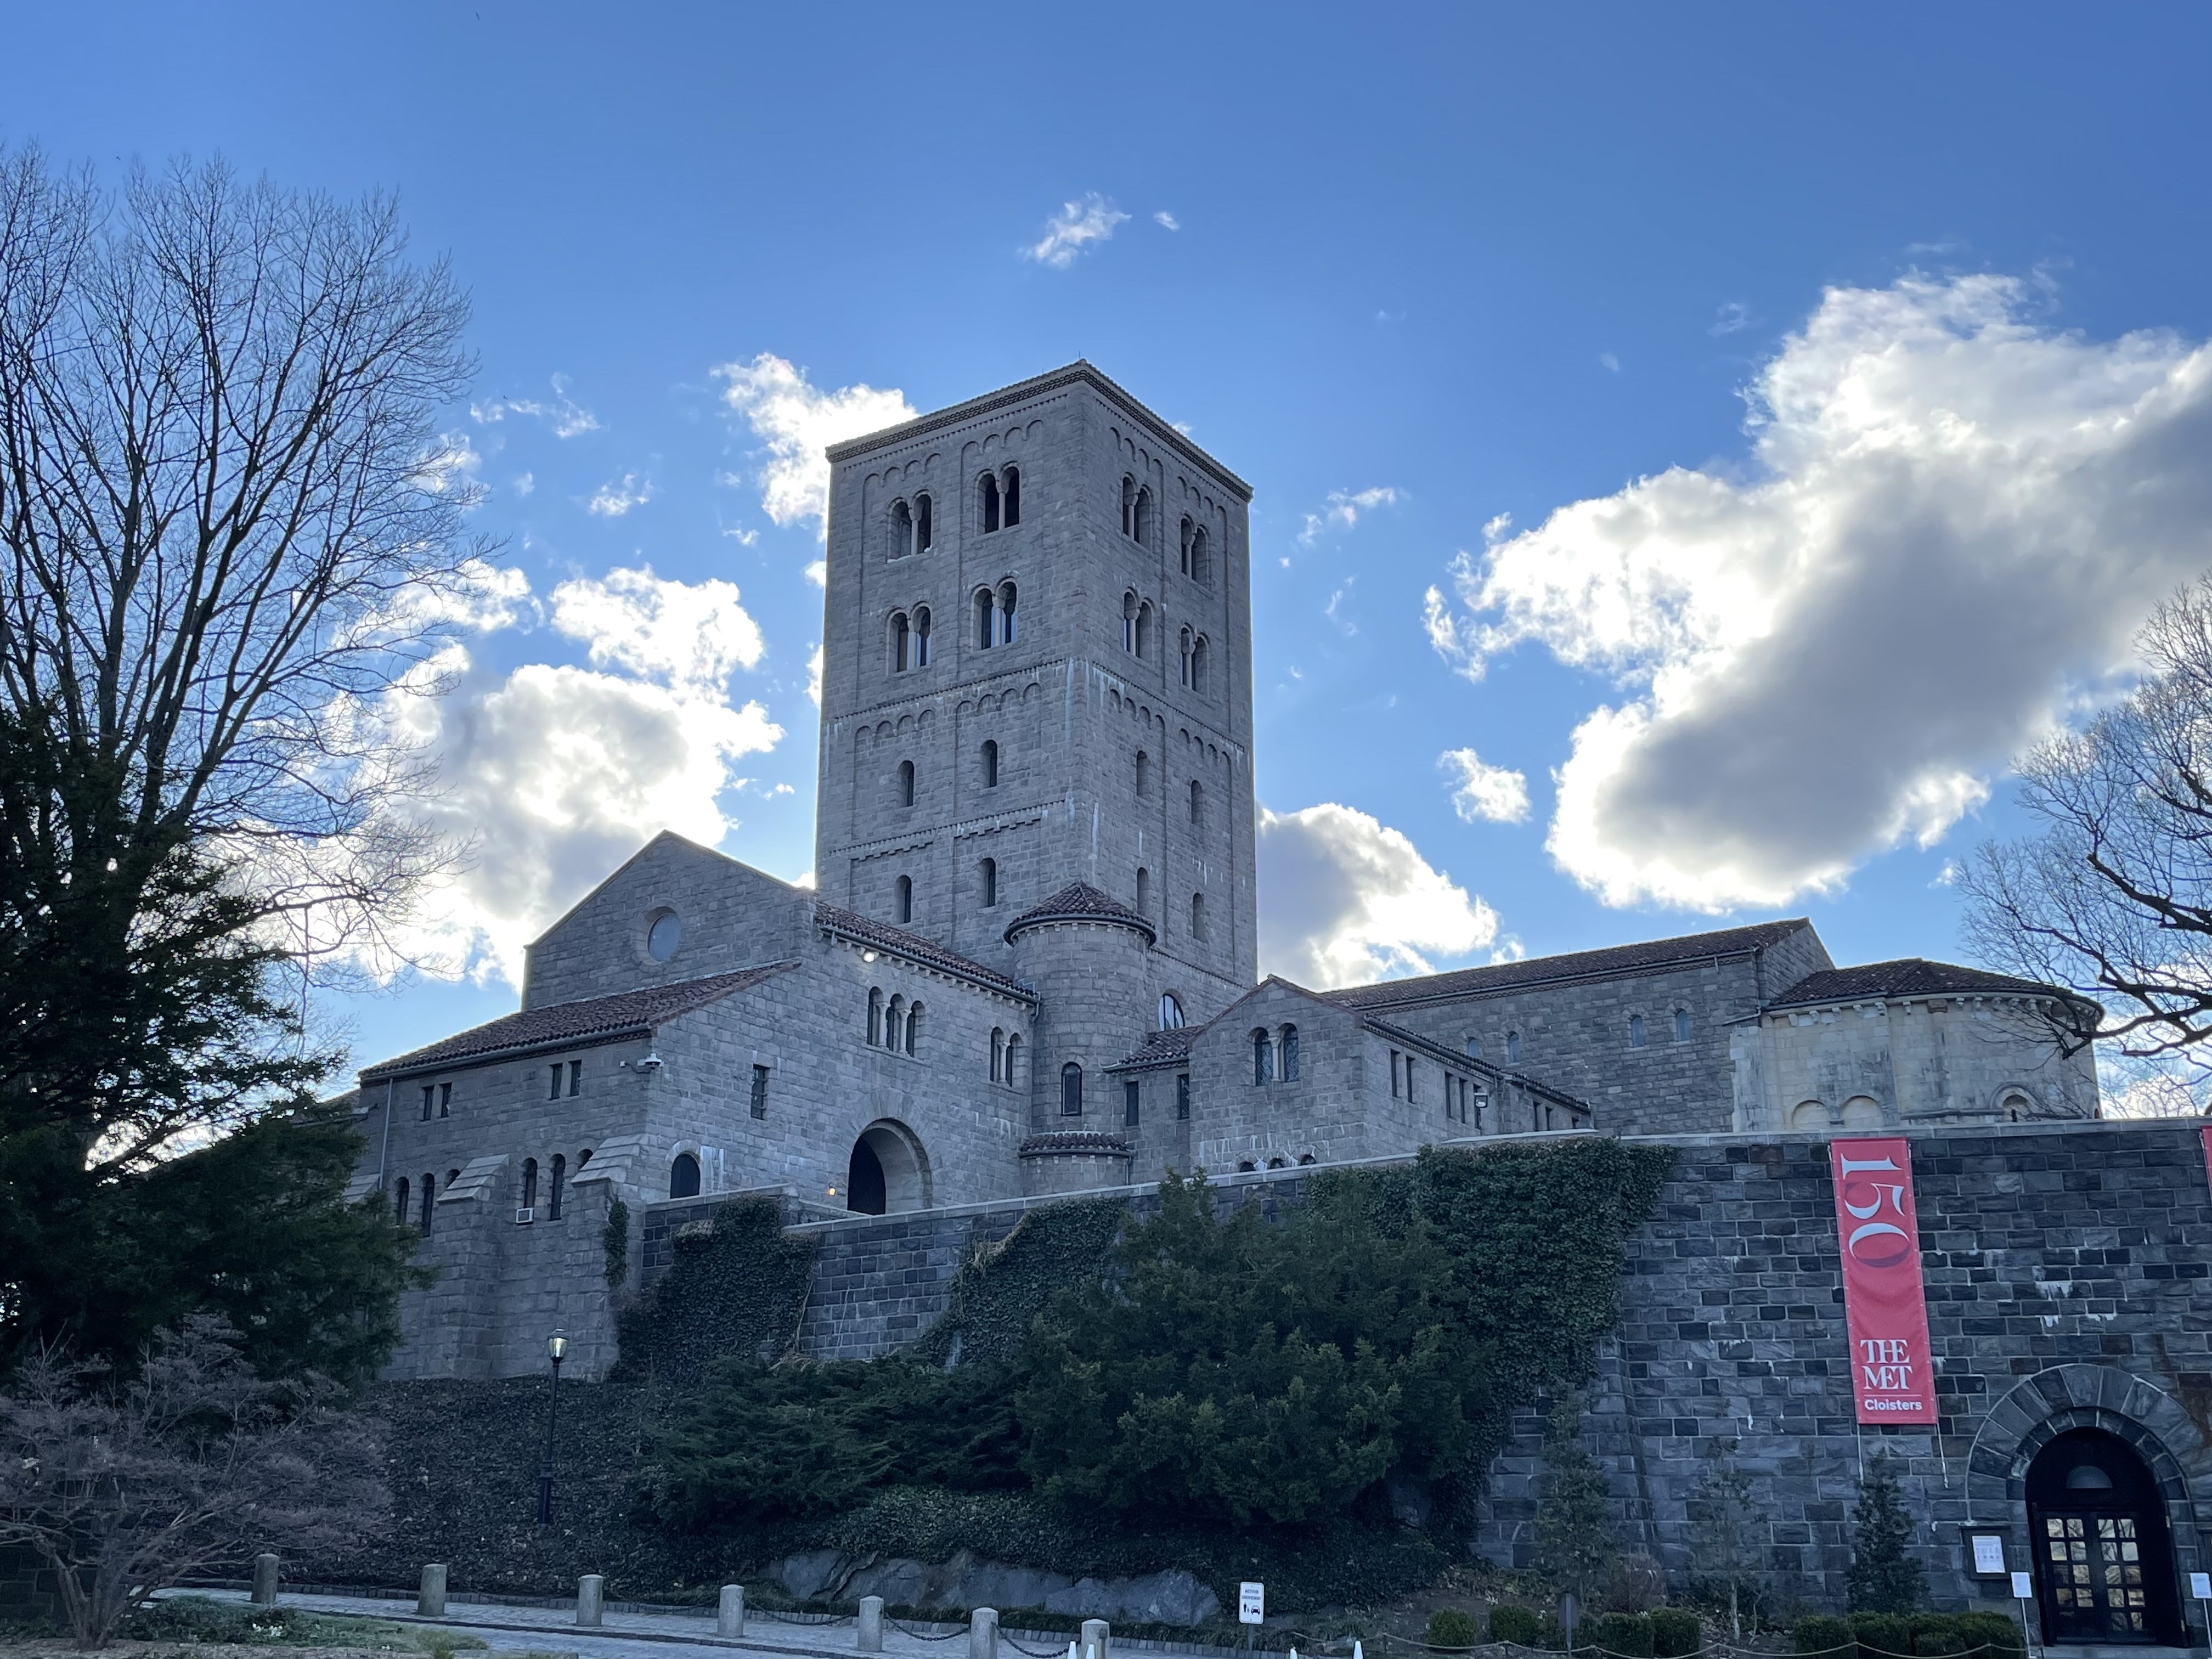 Picture of a place: The Met Cloisters